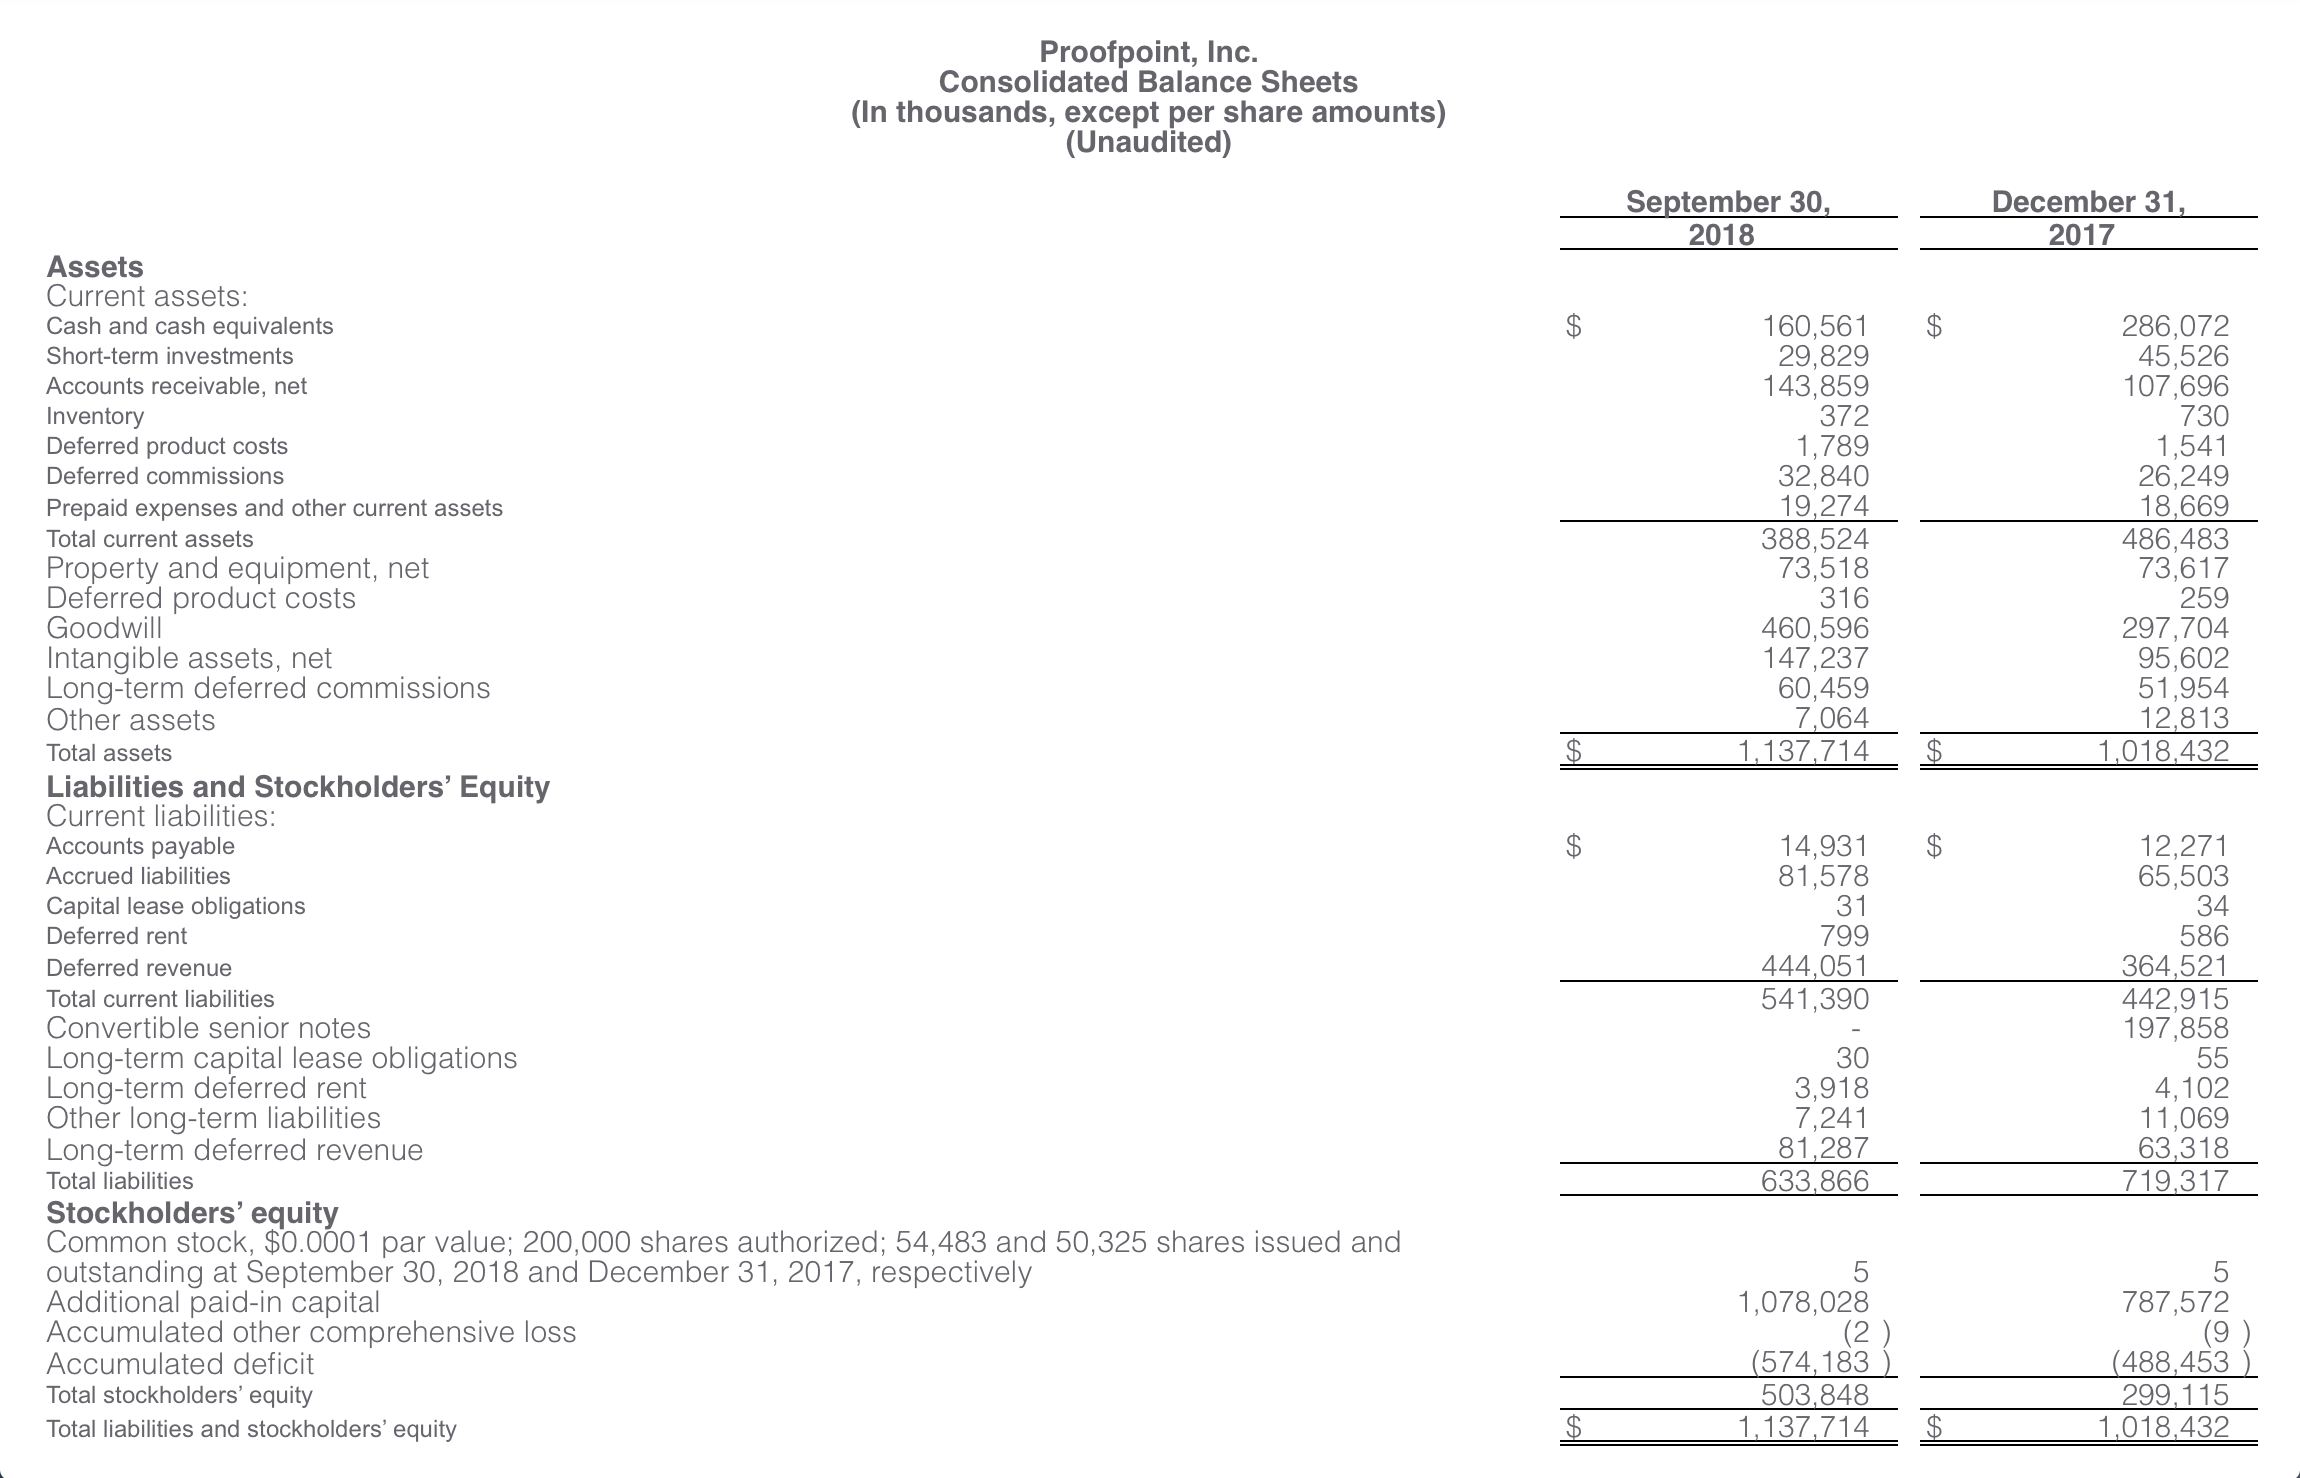 Proofpoint consolidated statements of operation report